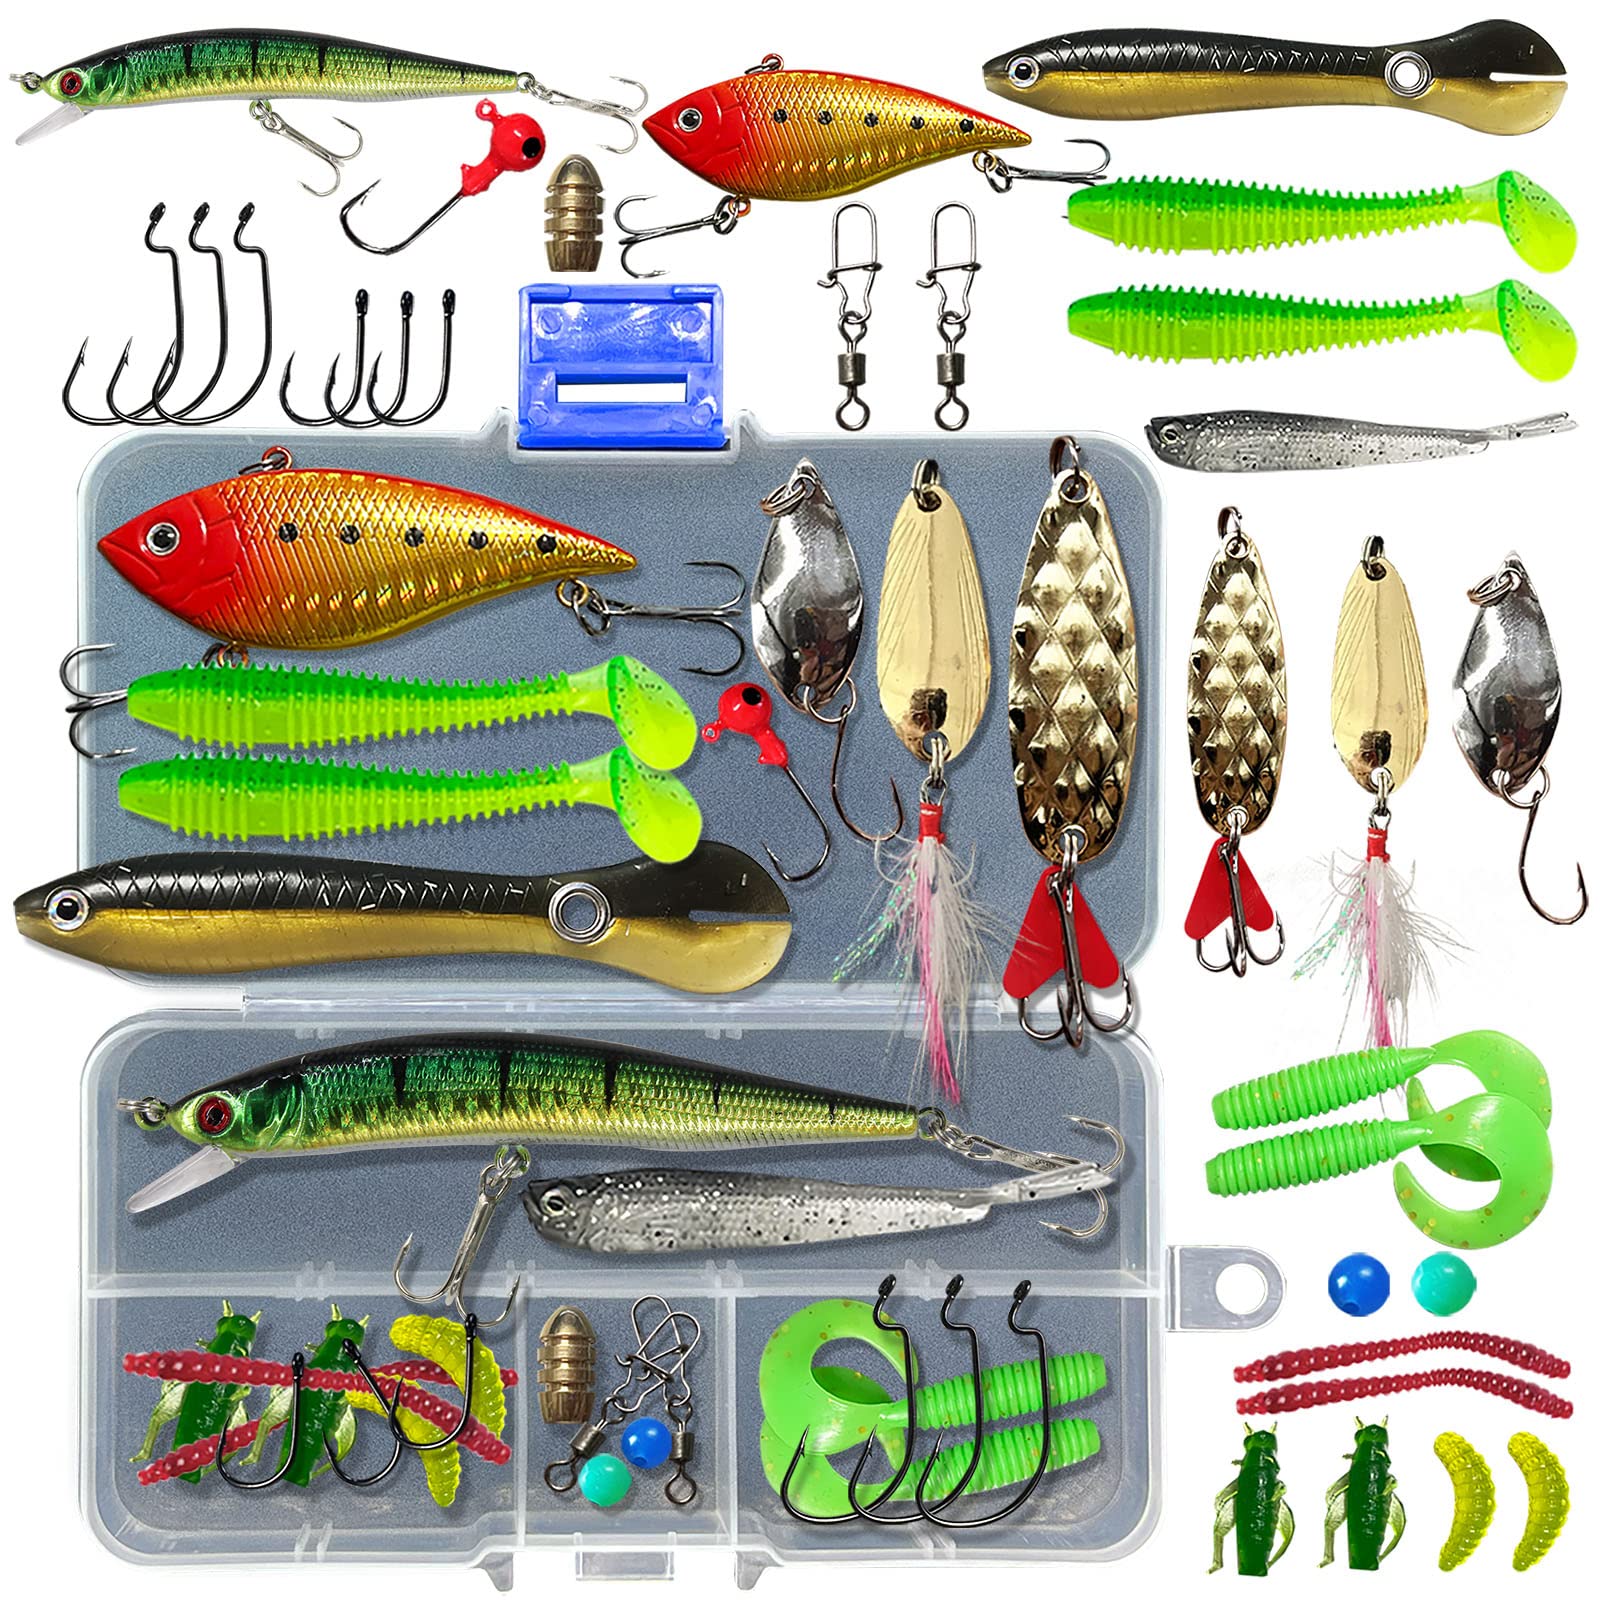 UperUper Fishing Lures Kit Set, Baits Tackle Including Crankbaits, Topwater  Lures, Spinnerbaits, Worms, Jigs, Hooks, Tackle